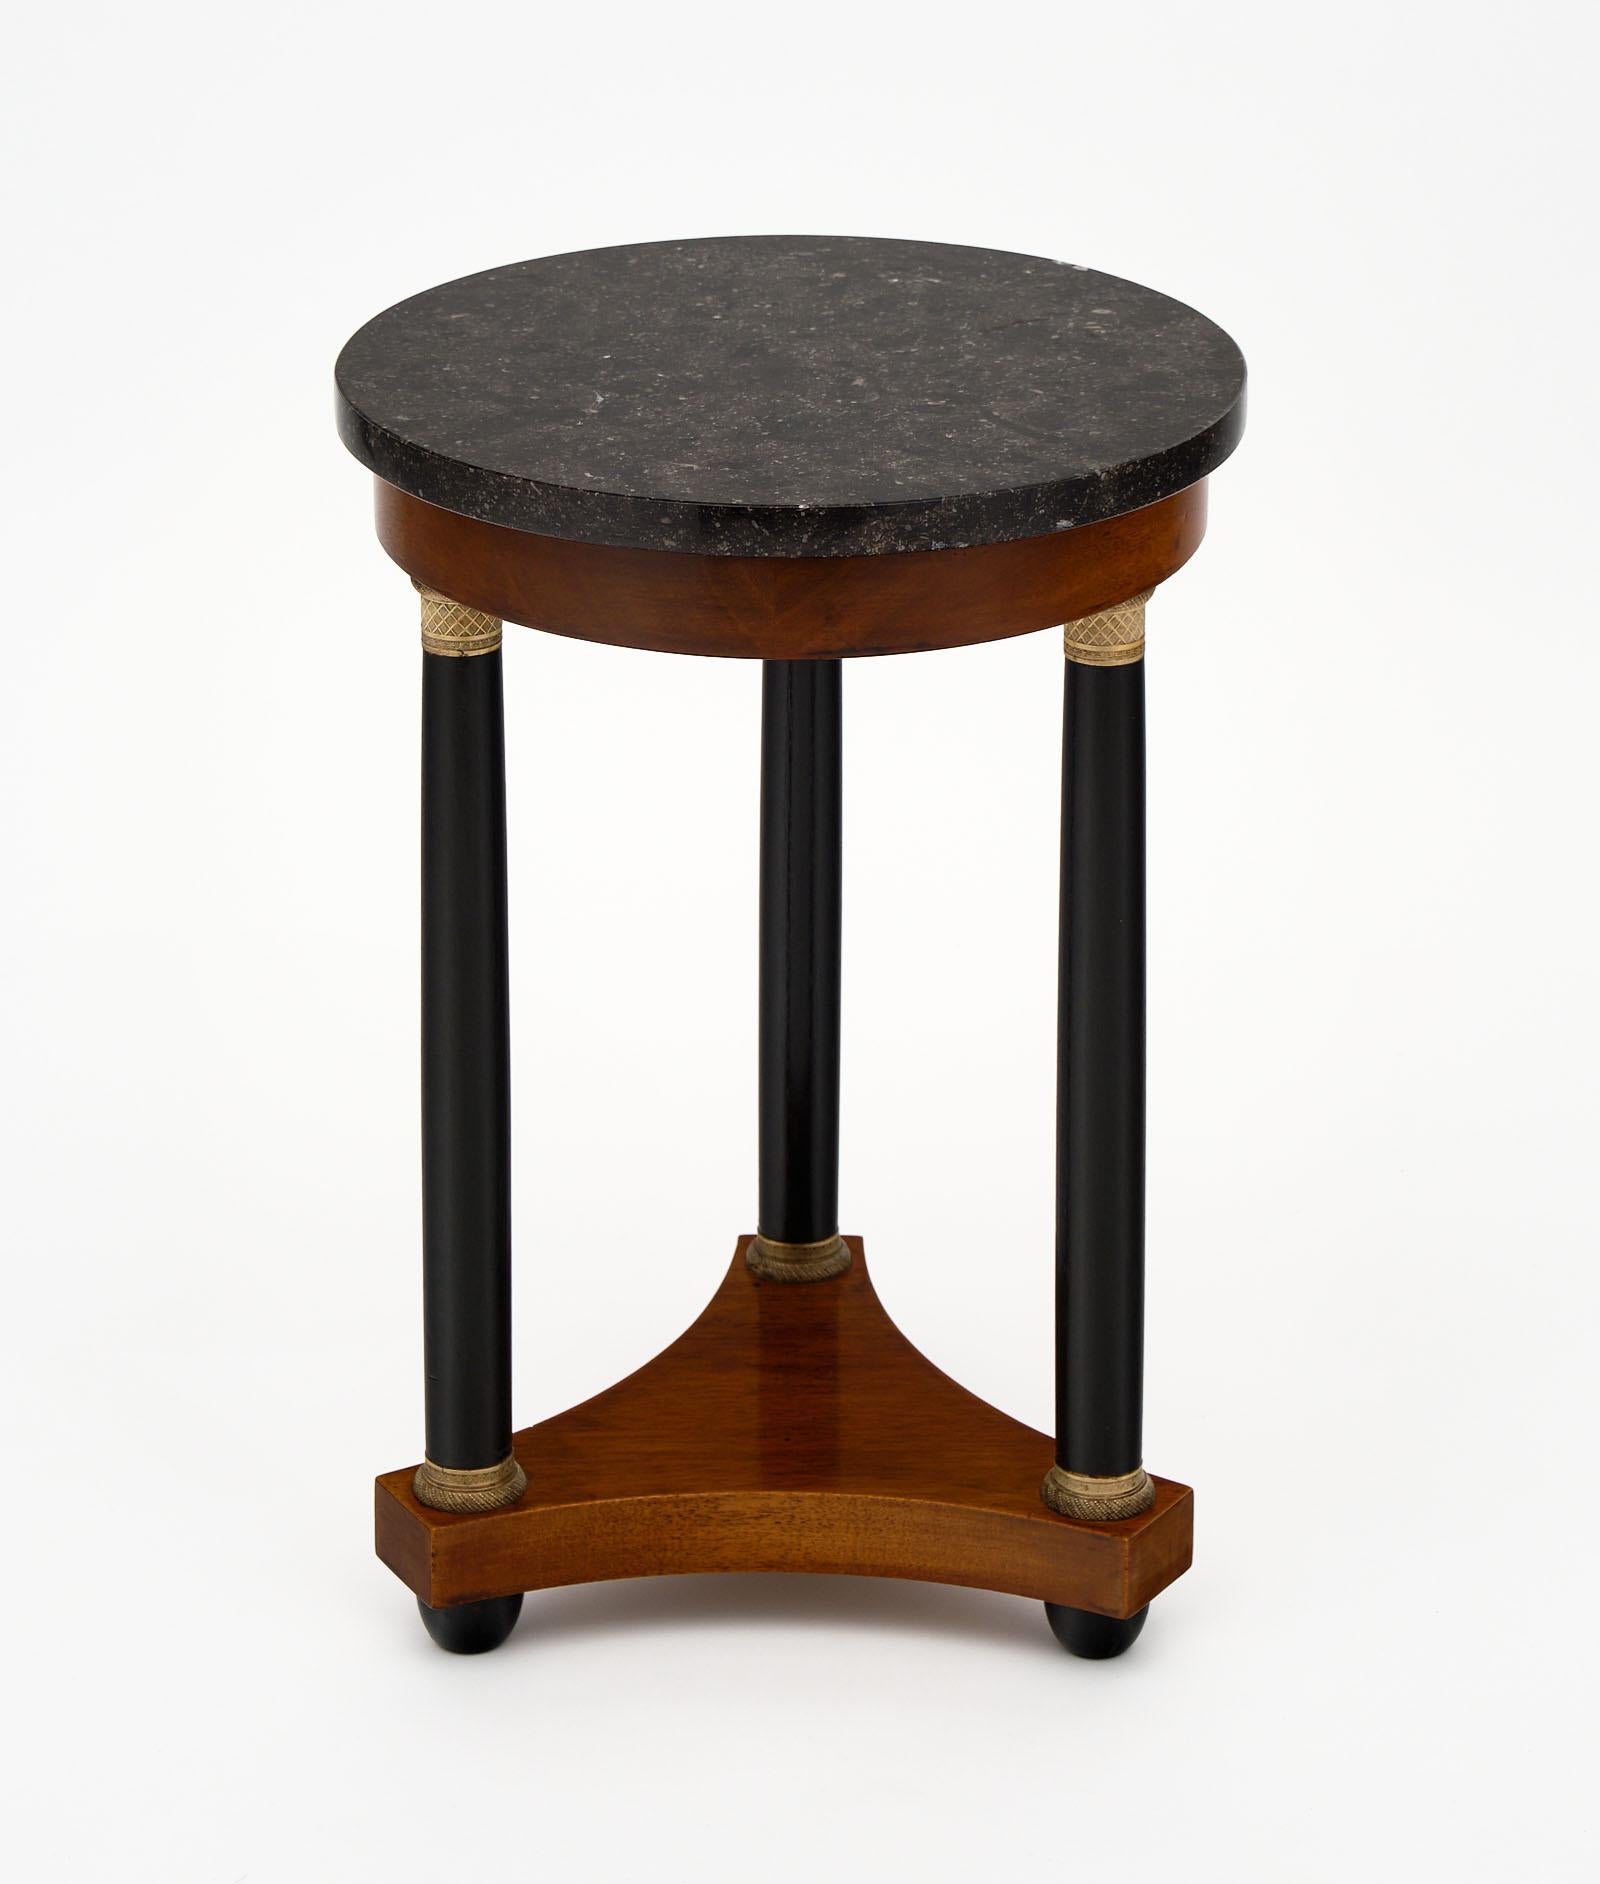 French Empire style antique side table with a mahogany tripod base. The three legs have been ebonized for added elegance. The top is an original black marble. We love the finely cast bronze elements as well!